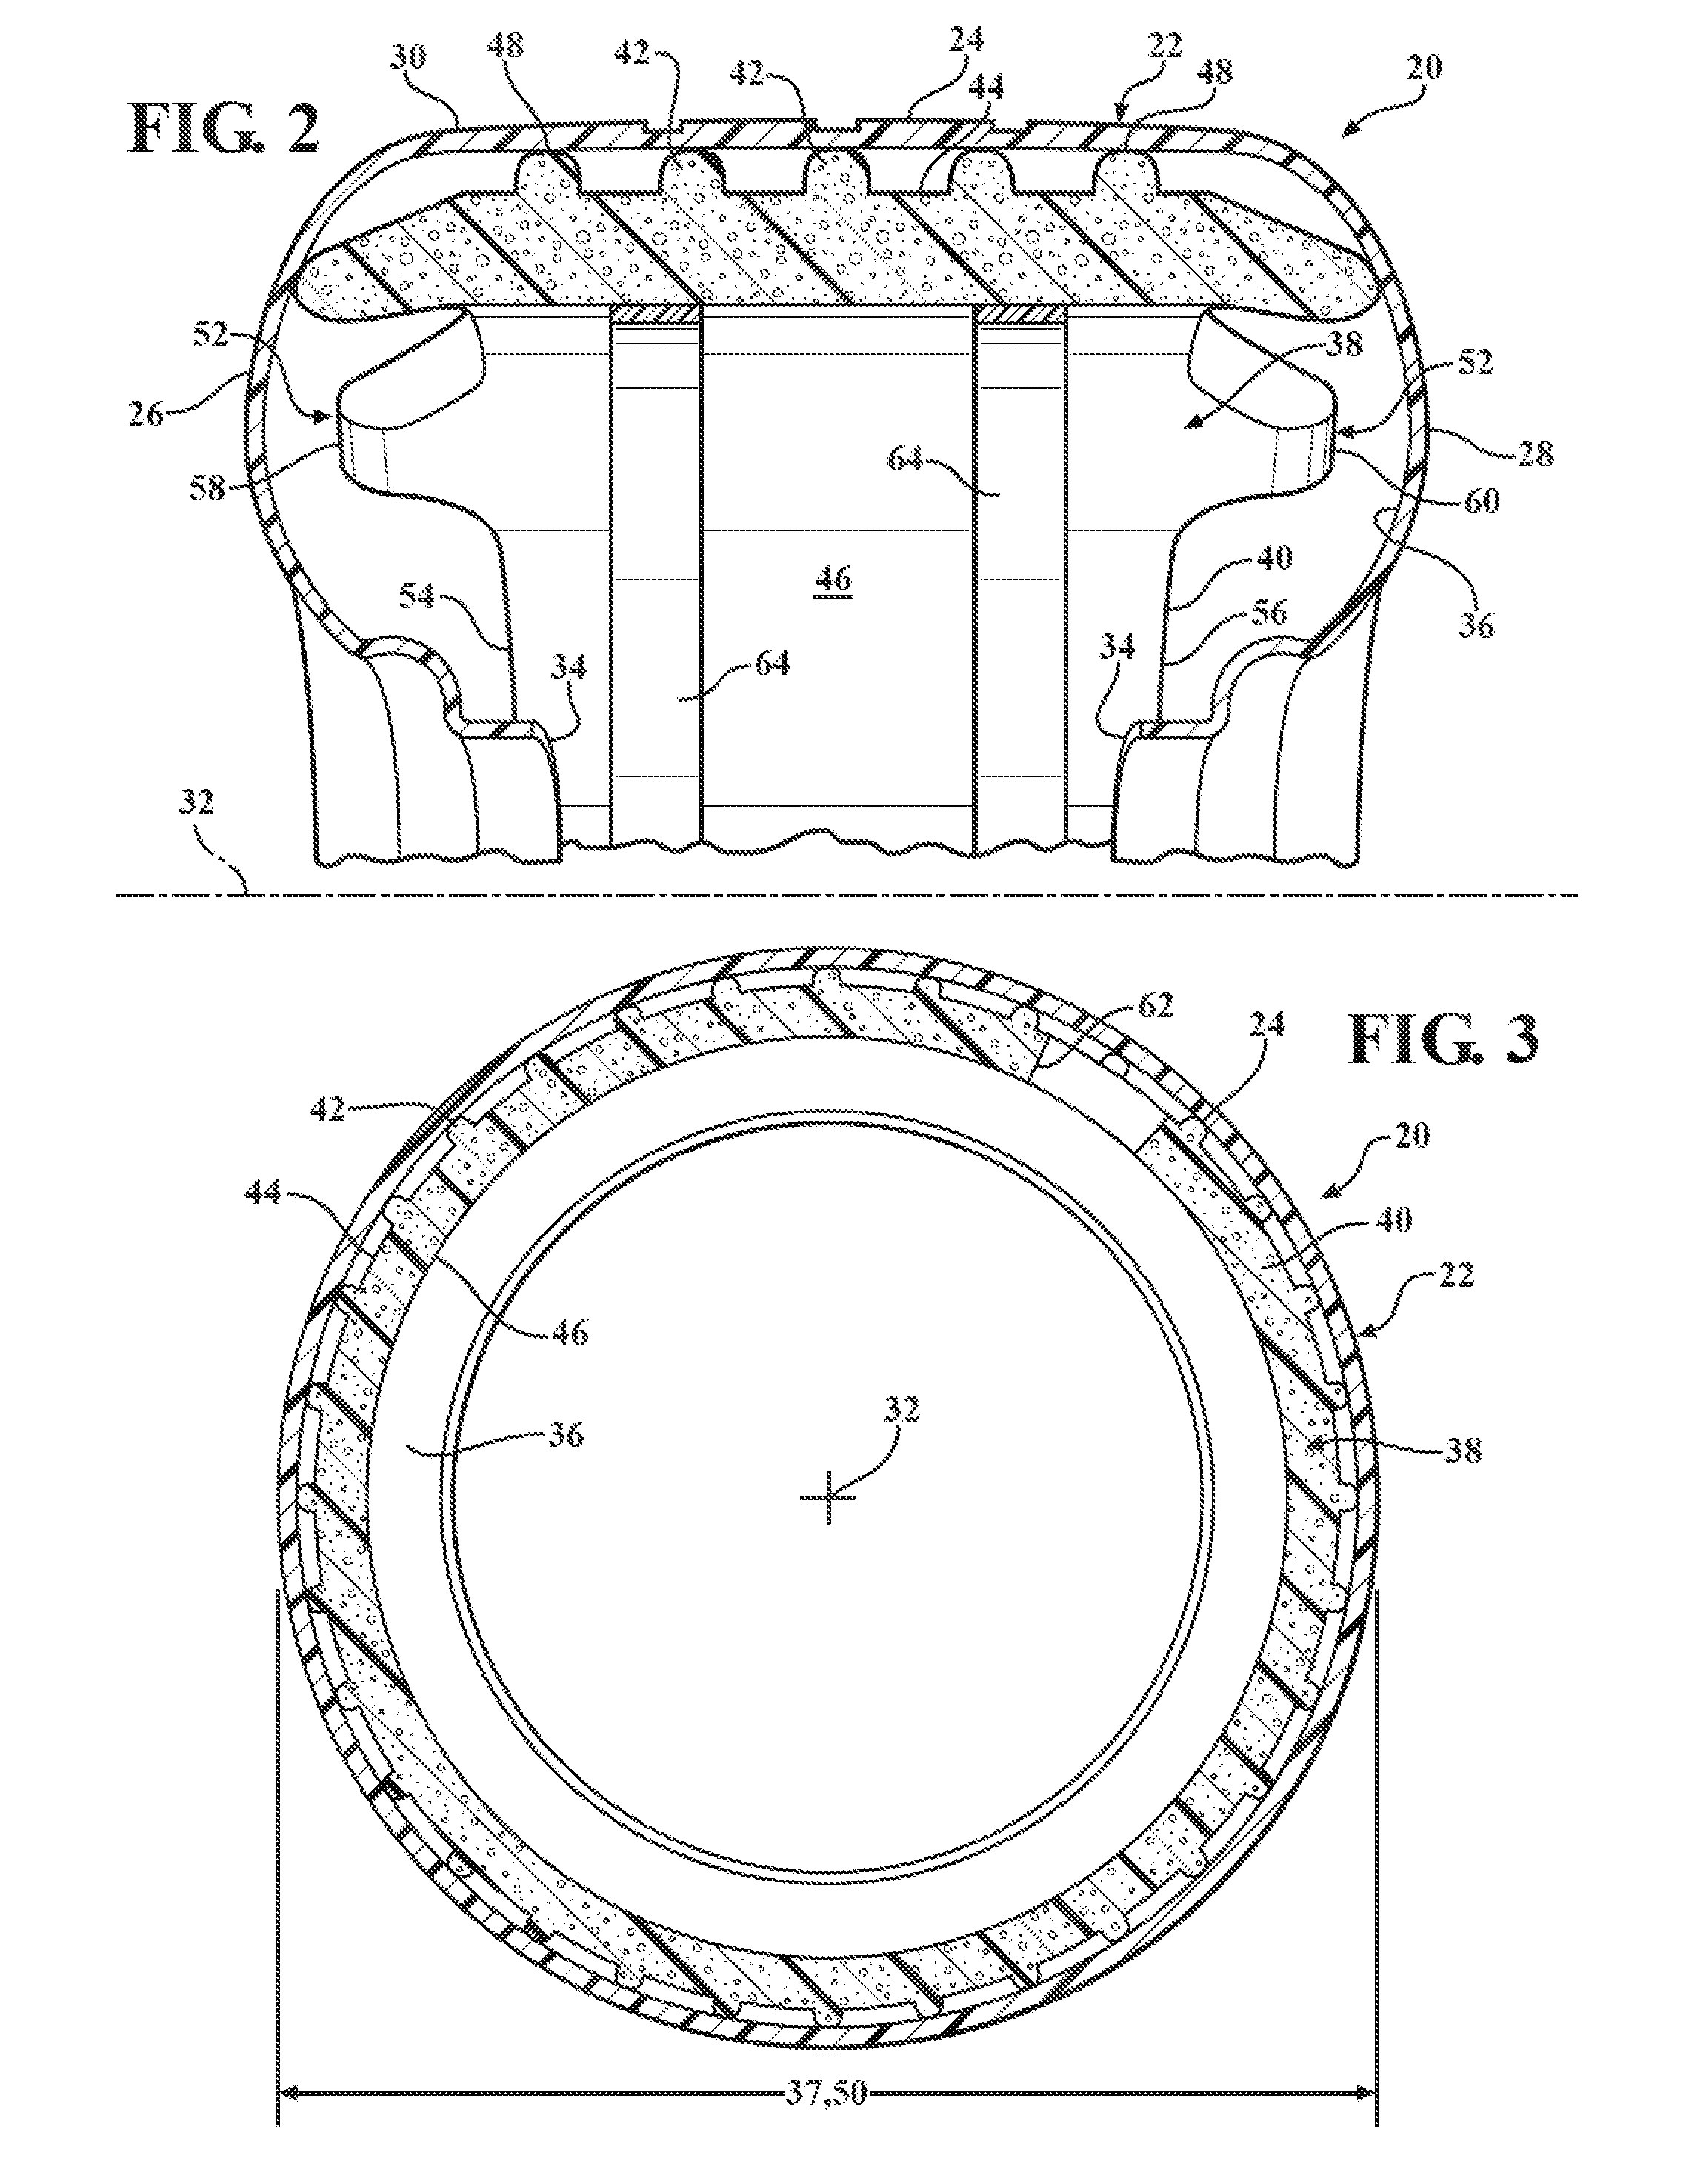 Acoustical core for absorbing noise within a tire interior cavity